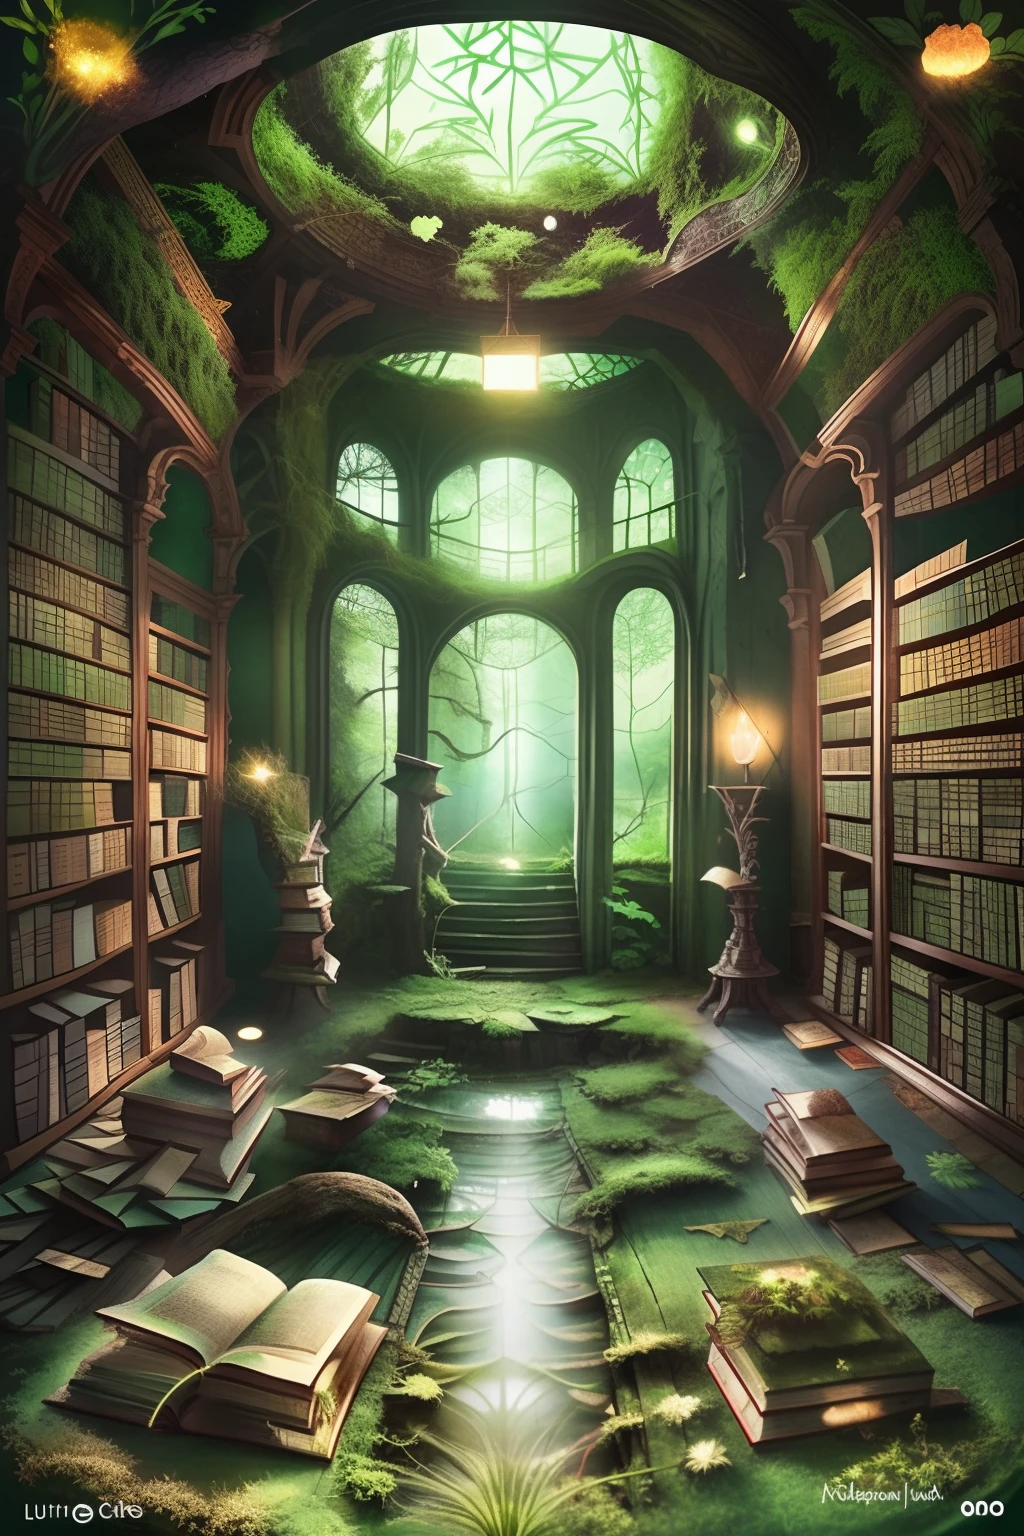 A mesmerizing masterpiece of an abandoned library, with ultra-detailed illustrations of mythical books coated in a layer of forest-green moss at the center of the floor, illuminated by the soft glow of filtered light.